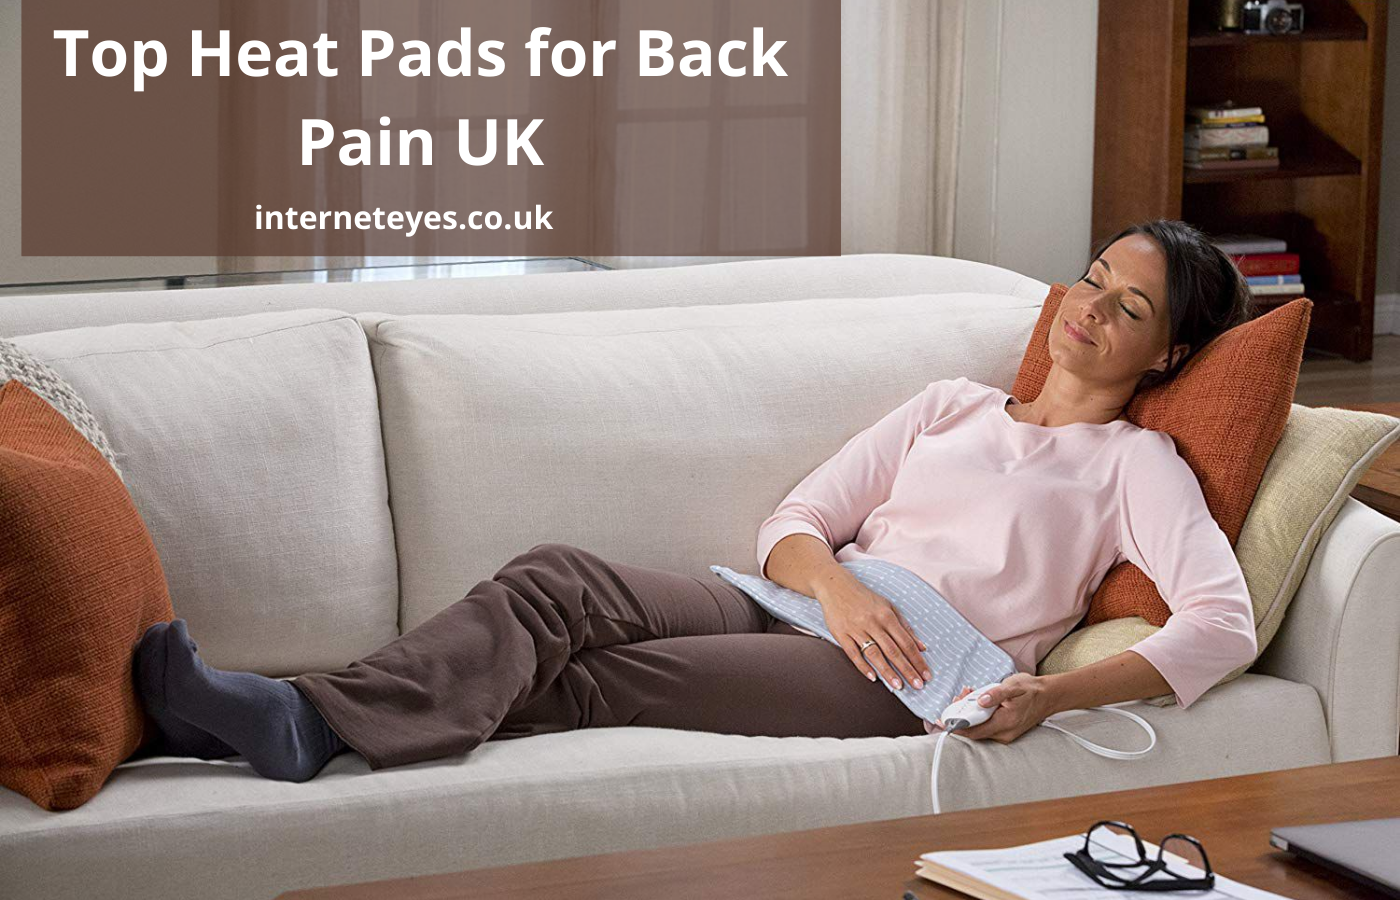 Top Heat Pads for Back Pain UK